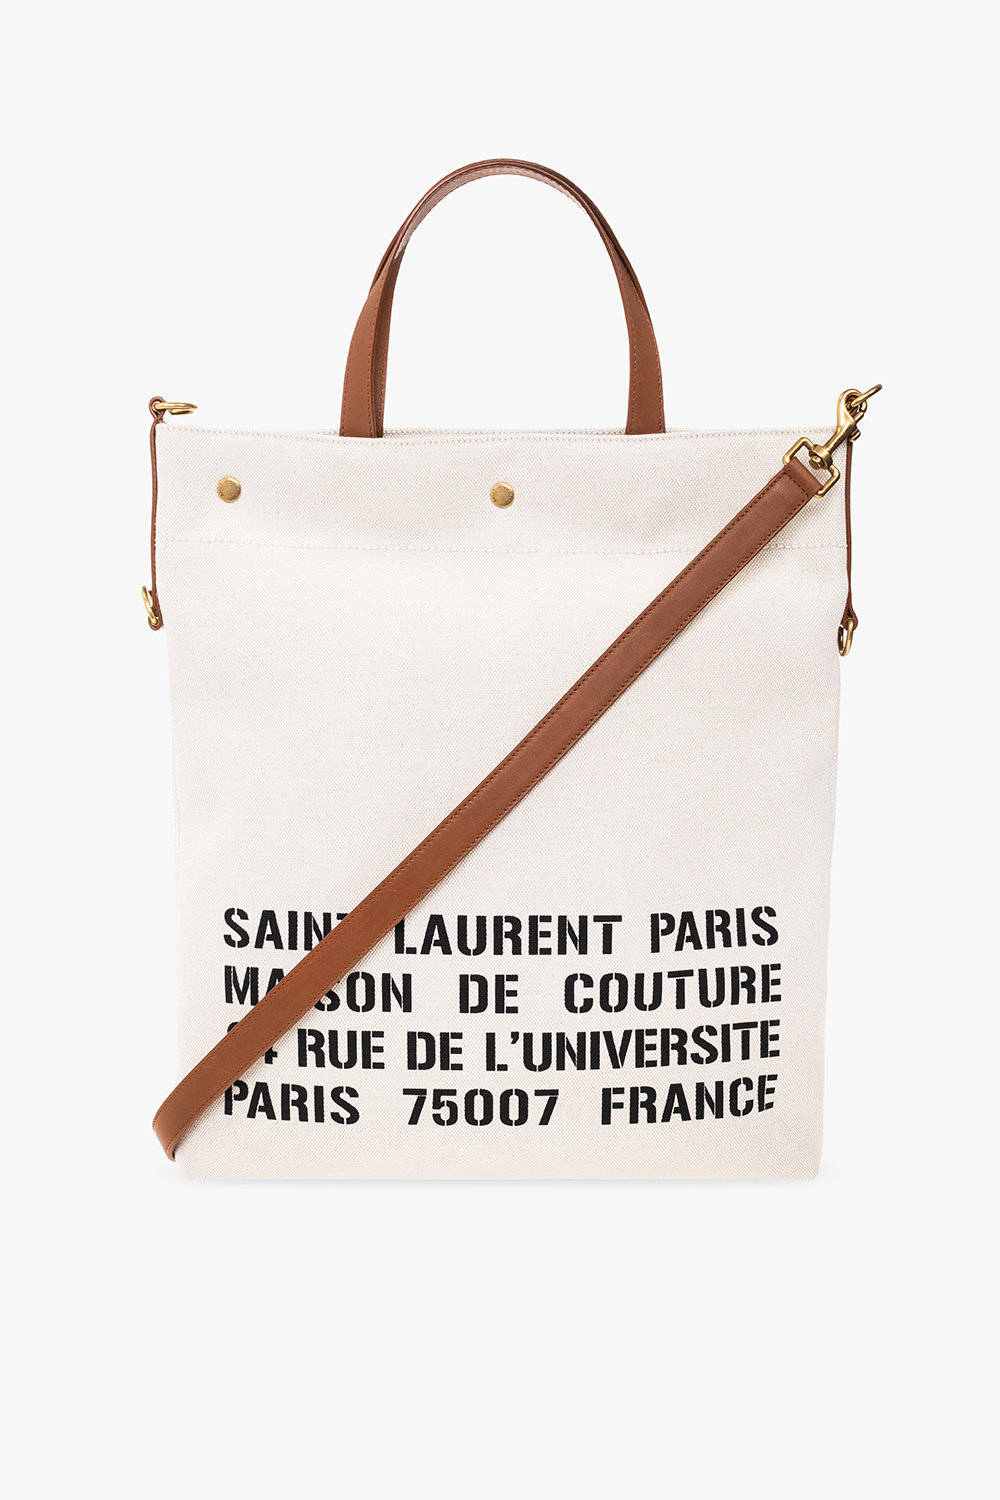 Is the YSL Shopper's Tote a good bag for uni? How does it hold up